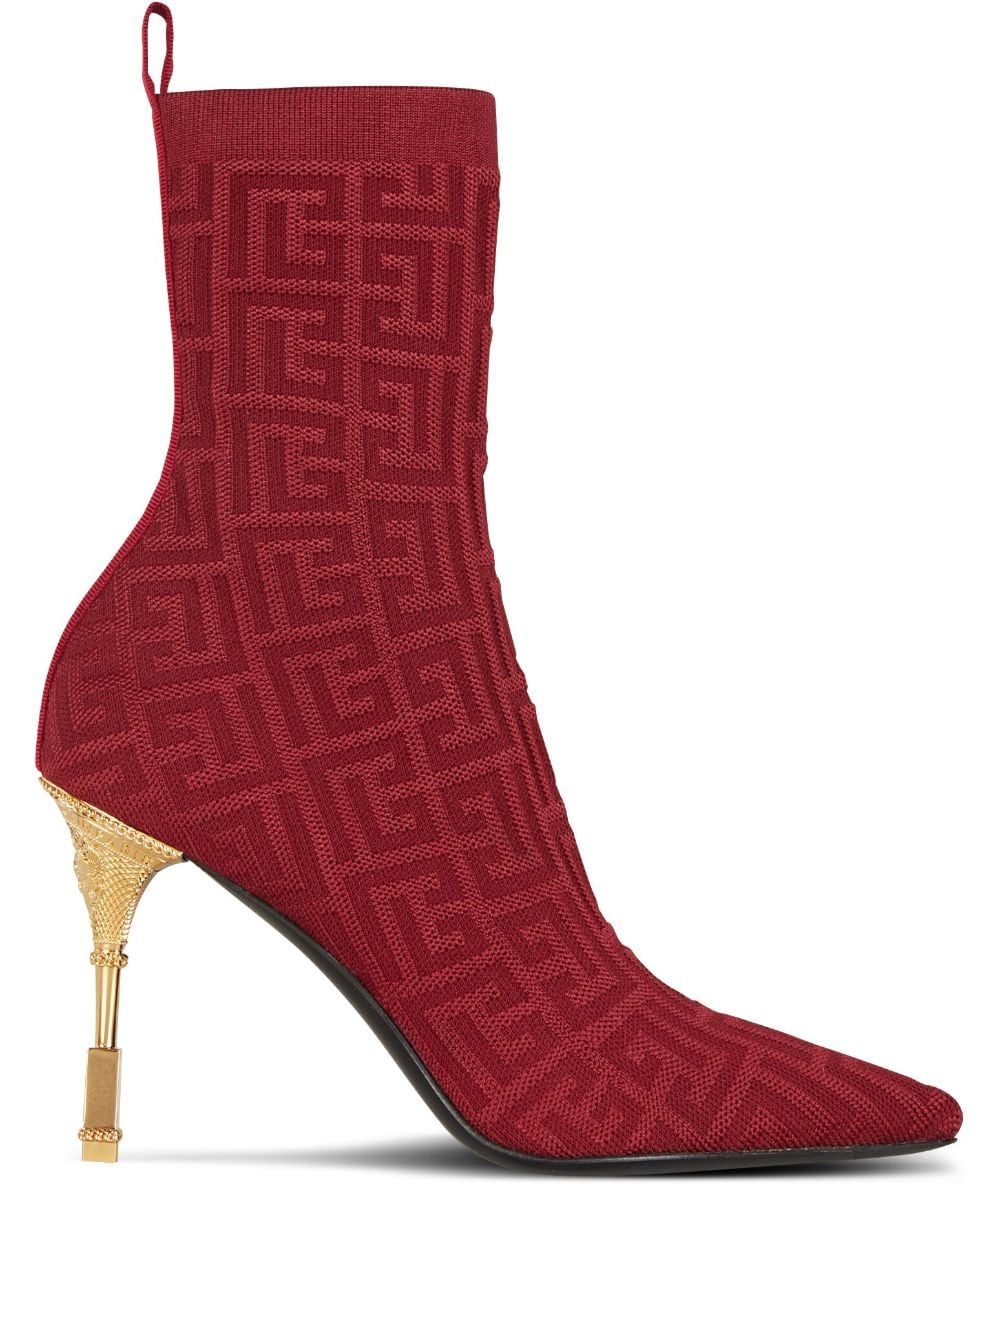 BALMAIN LUXURIOUS ANKLE BOOTS IN DEEP PLUM FOR FASHIONABLE WOMEN